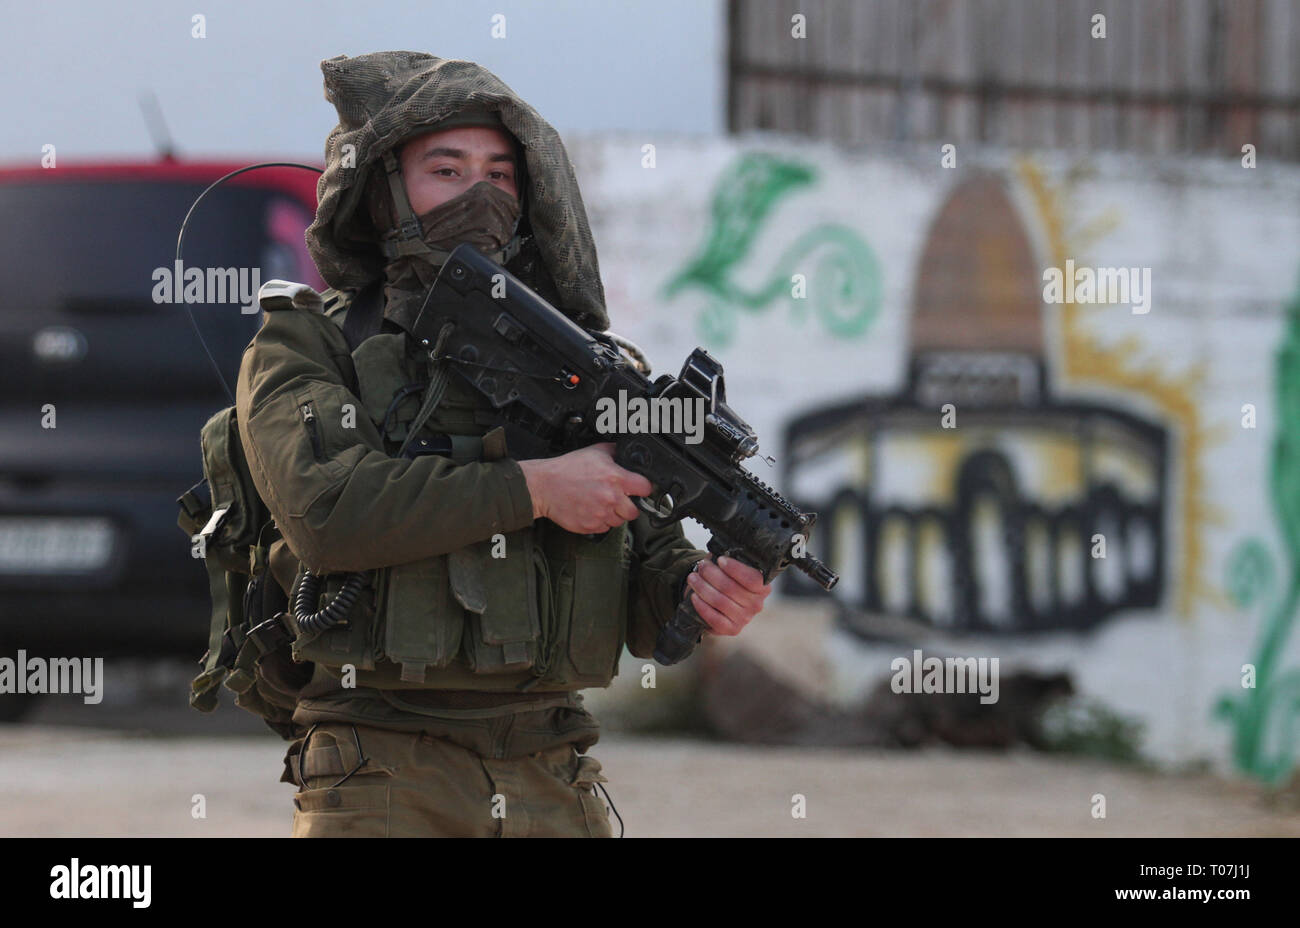 Nablus, West Bank city of Nablus. 18th Mar, 2019. An Israeli soldier patrols a street in Salem village, east of the West Bank city of Nablus, March 18, 2019. Israeli troops searched the West Bank for the suspected Palestinian killer of an Israeli soldier on Monday. The Palestinian killed an Israeli and severely injured two others in shooting and stabbing attacks before fleeing the scene on Sunday, Israeli army said. Credit: Nidal Eshtayeh/Xinhua/Alamy Live News Stock Photo